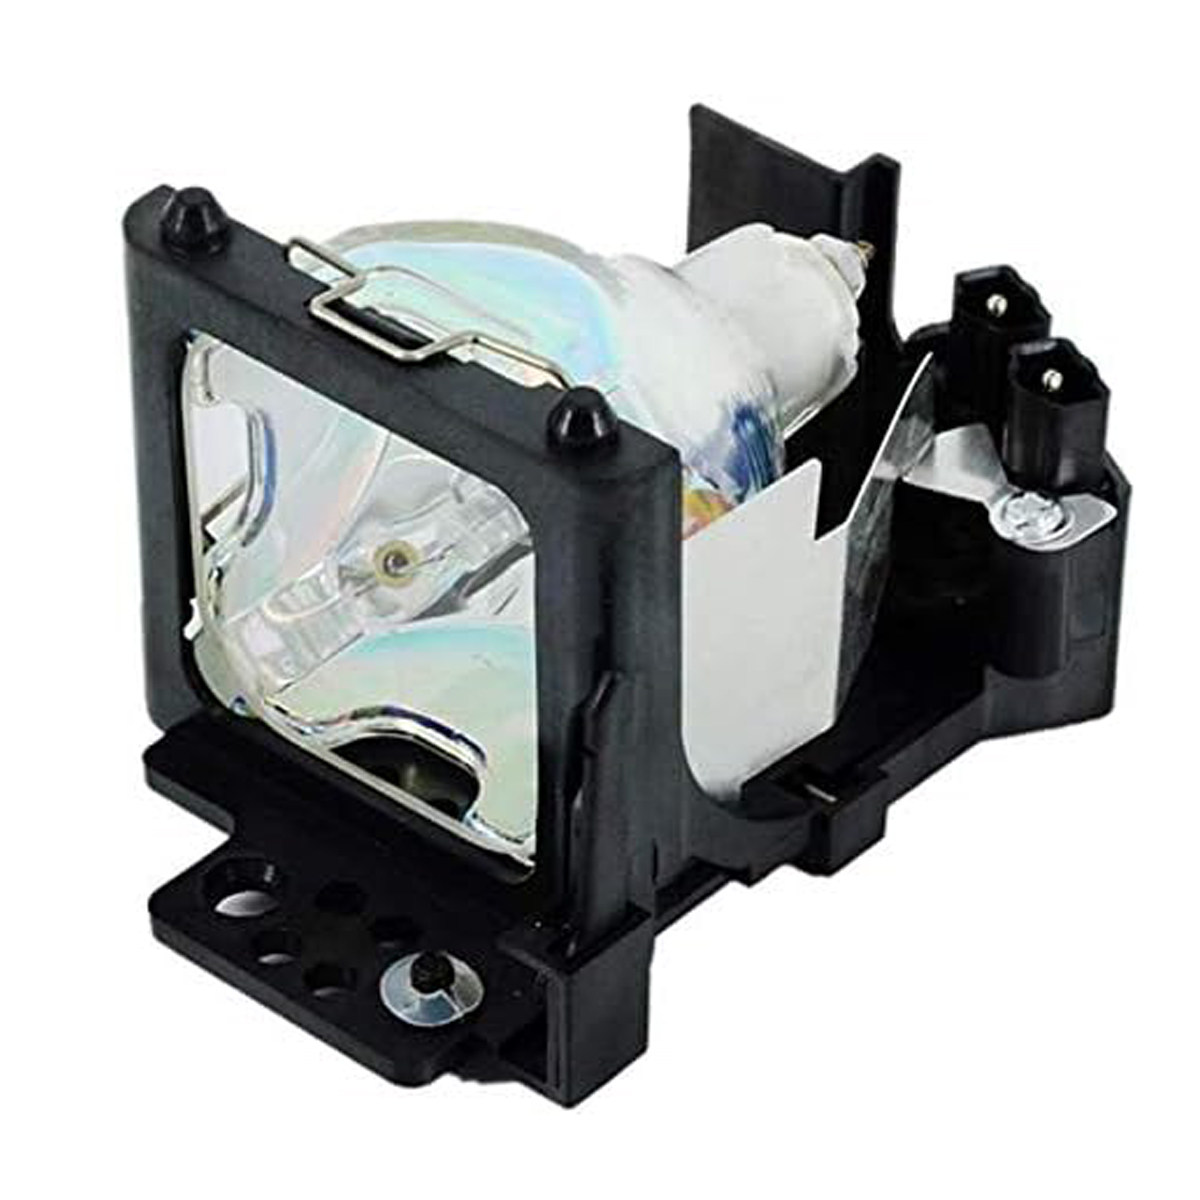 Replacement Projector lamp DT00461 For Hitachi CP-HX1080 CP-HX1098 CP-X275A CP-X275W